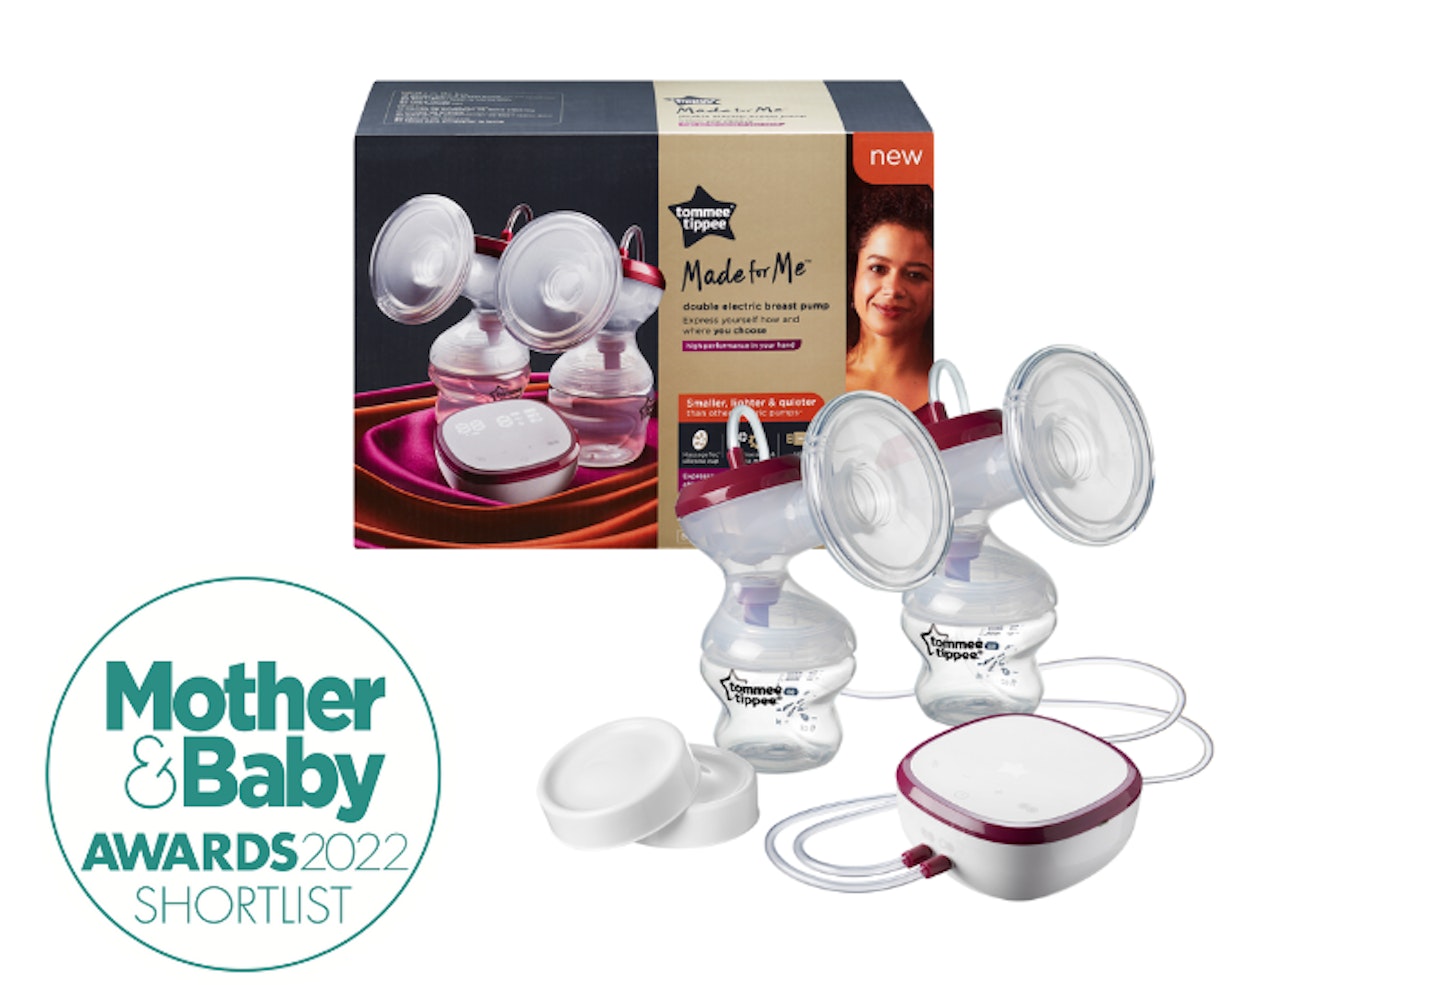 https://images.bauerhosting.com/affiliates/sites/12/motherandbaby/2021/09/Tommee-Tippee-Made-for-Me-Award.png?ar=16%3A9&fit=crop&crop=top&auto=format&w=1440&q=80